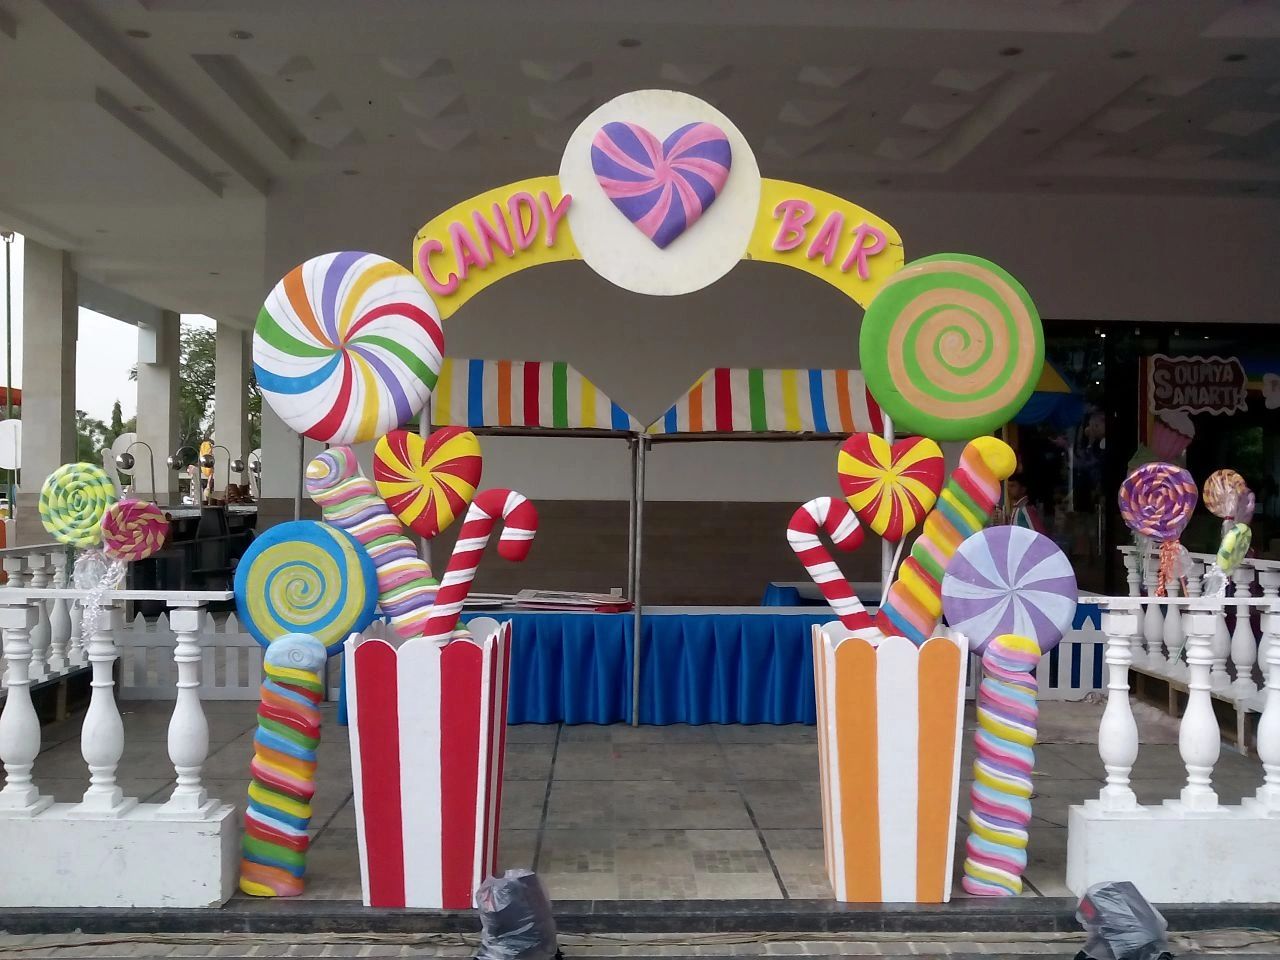 candy land theme party planning at birthday planner party setups